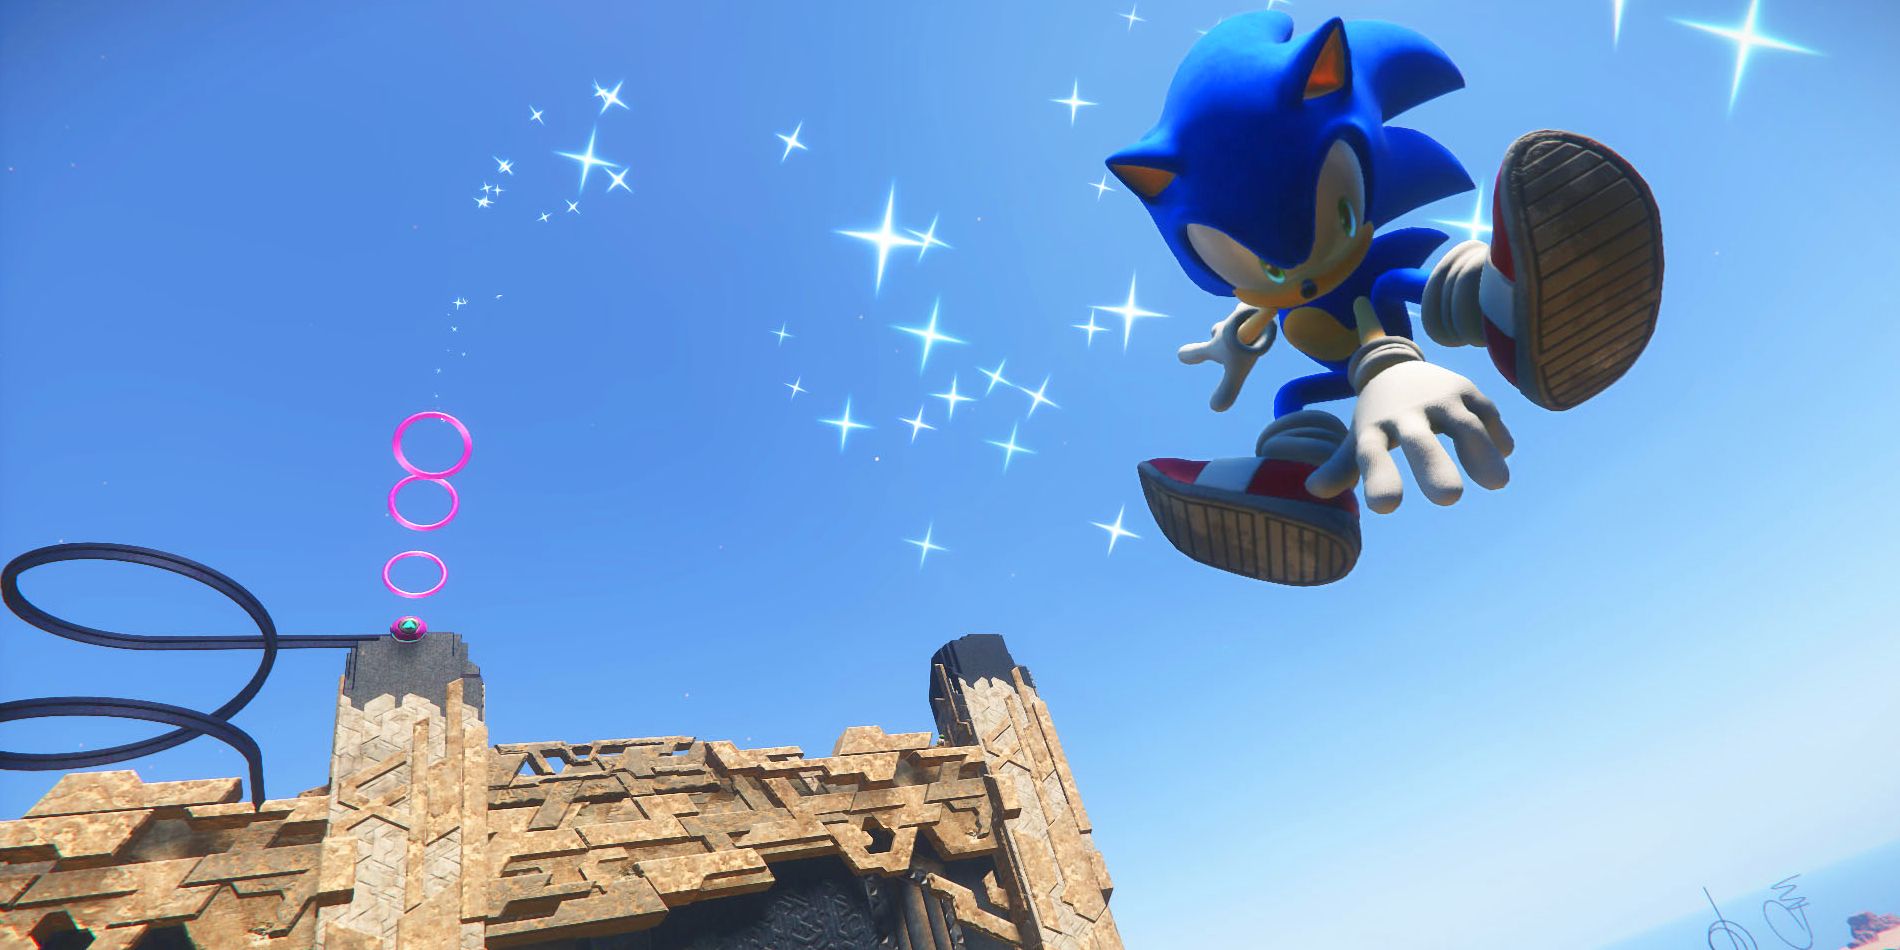 Sonic is seen doing a pose in mid air after jumping off of a ledge from some ruins while sparkles surround him.